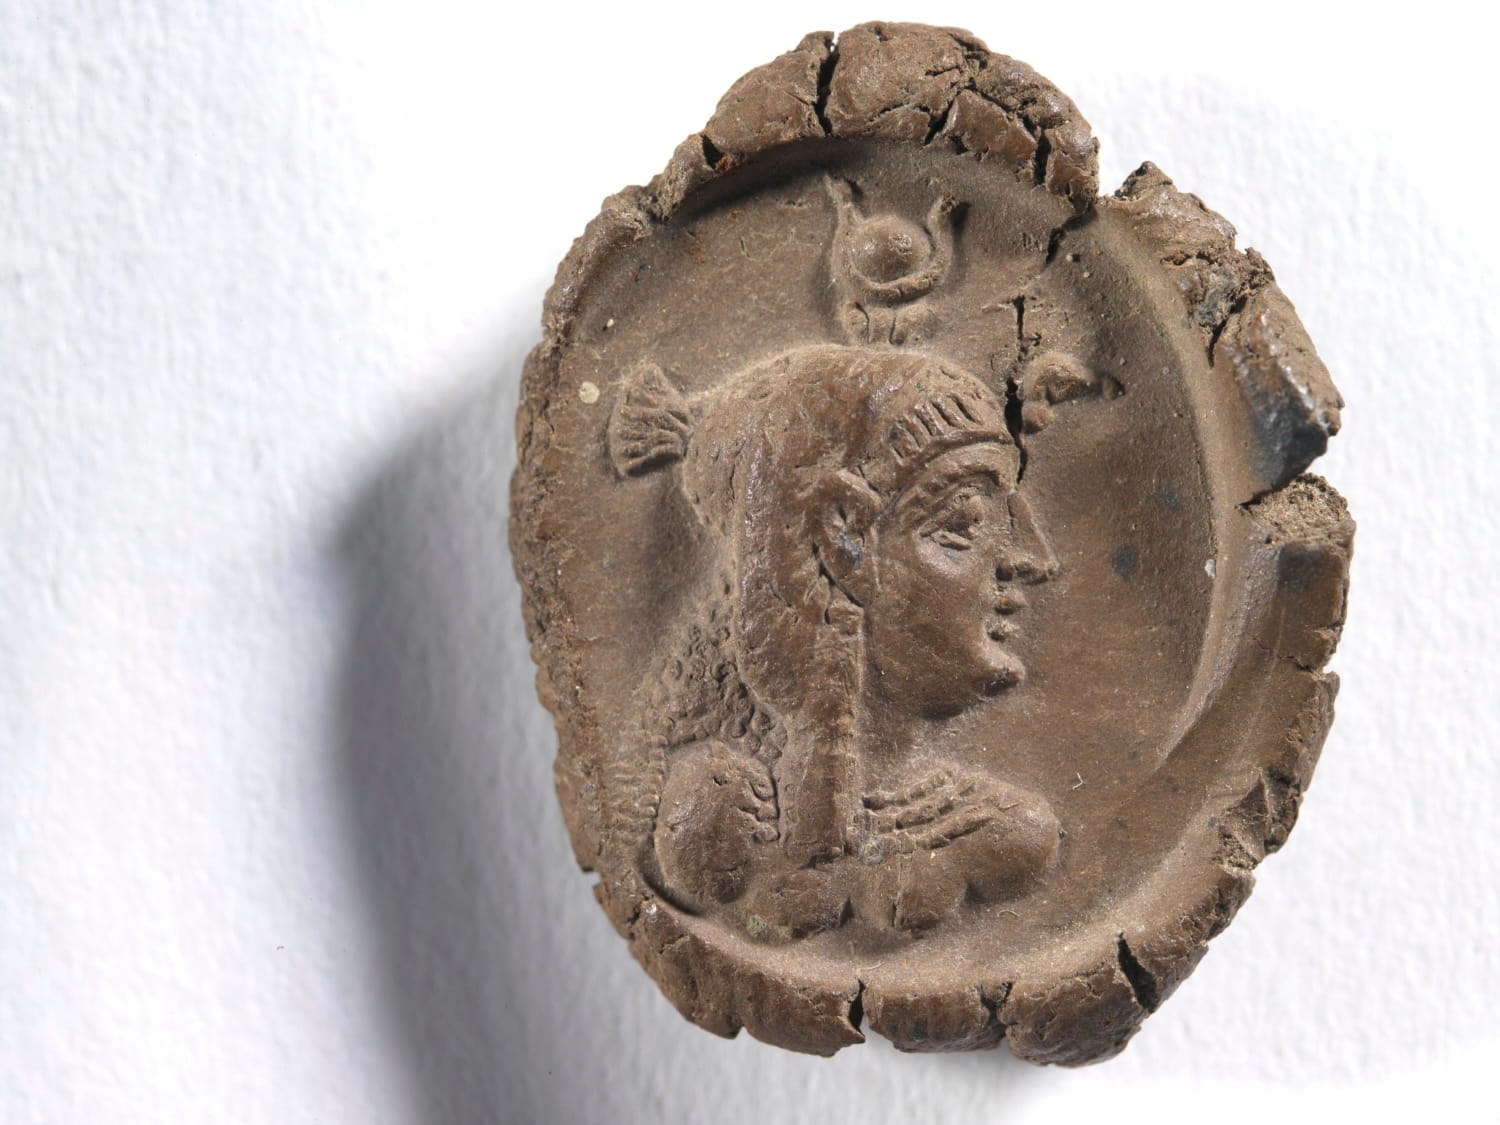 Seal impression with bust of Cleopatra VII wearing crown of Egypt, Dated to 50 - 30 BC. Material: Unfired Clay. Royal Ontario Museum.